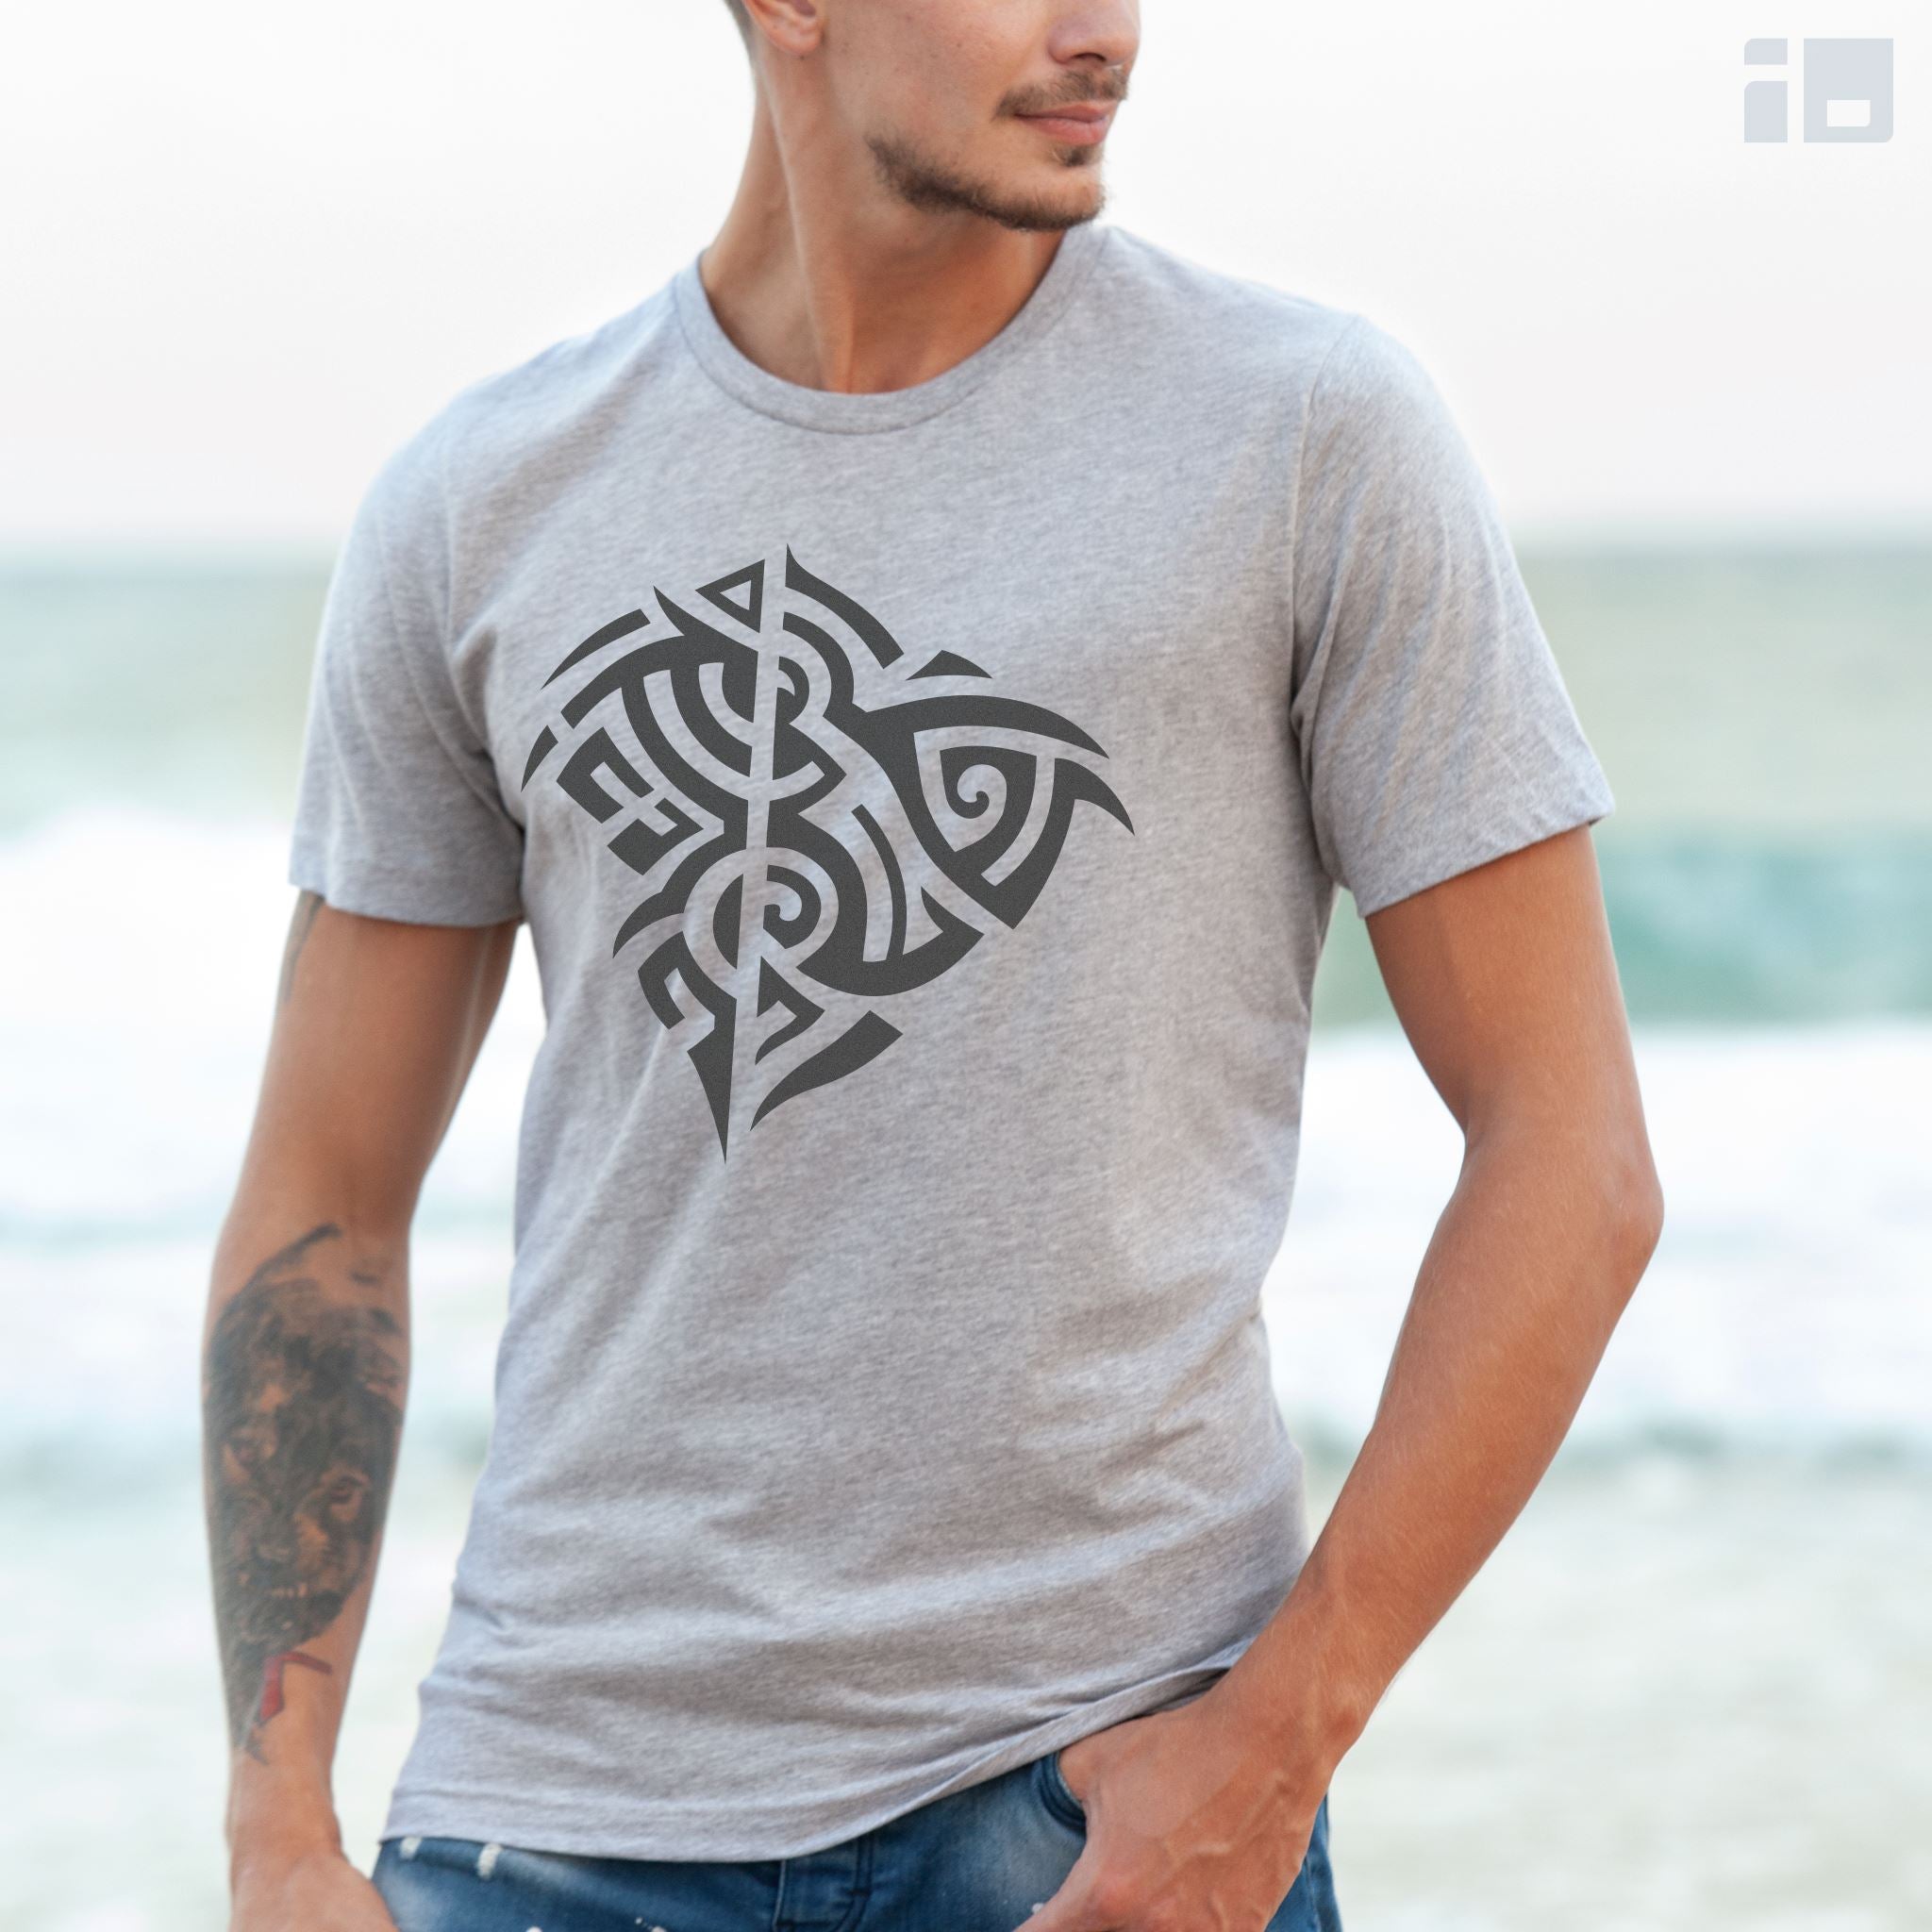 Limited edition | Tattoo inspired clothing | Cool shirt designs, Shirts,  Shirt designs